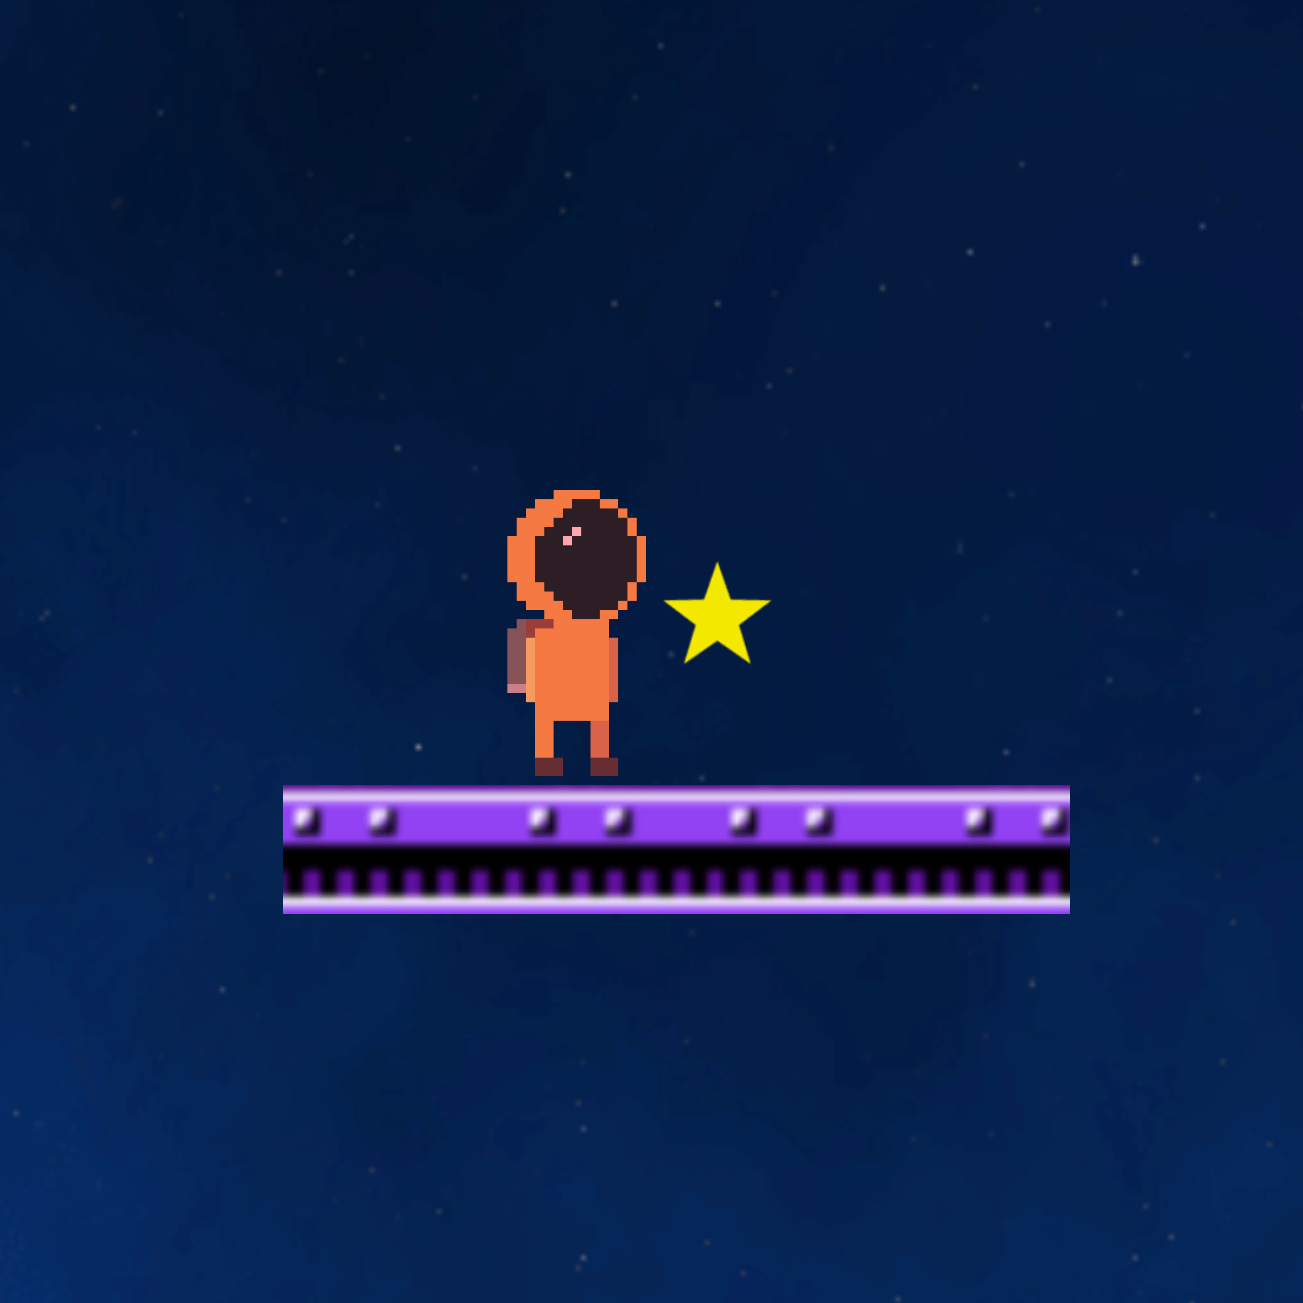 A screenshot from the game Star Bay showing a pixle art orange astronaut on a purple platform with a yellow start to the right of the astronaut.